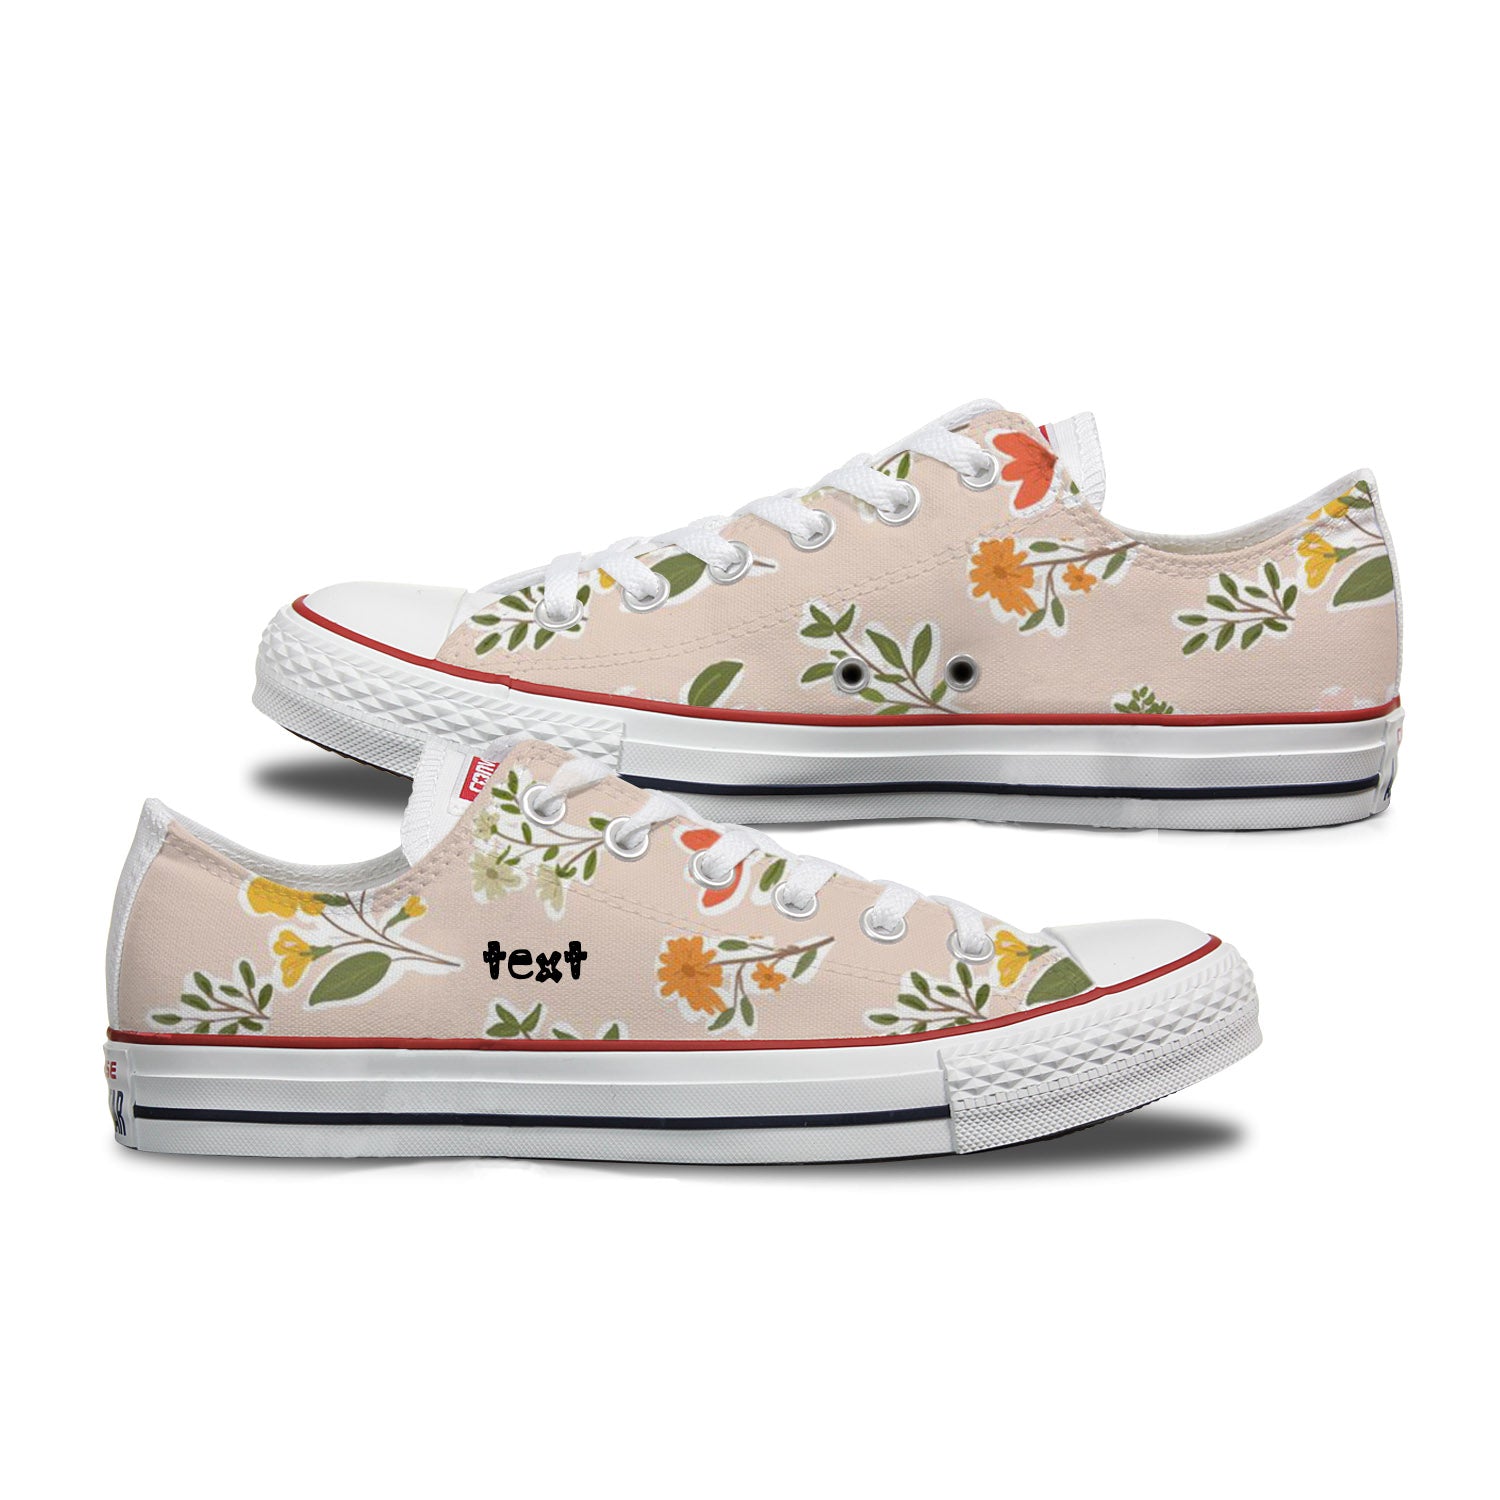 converse with flower pattern